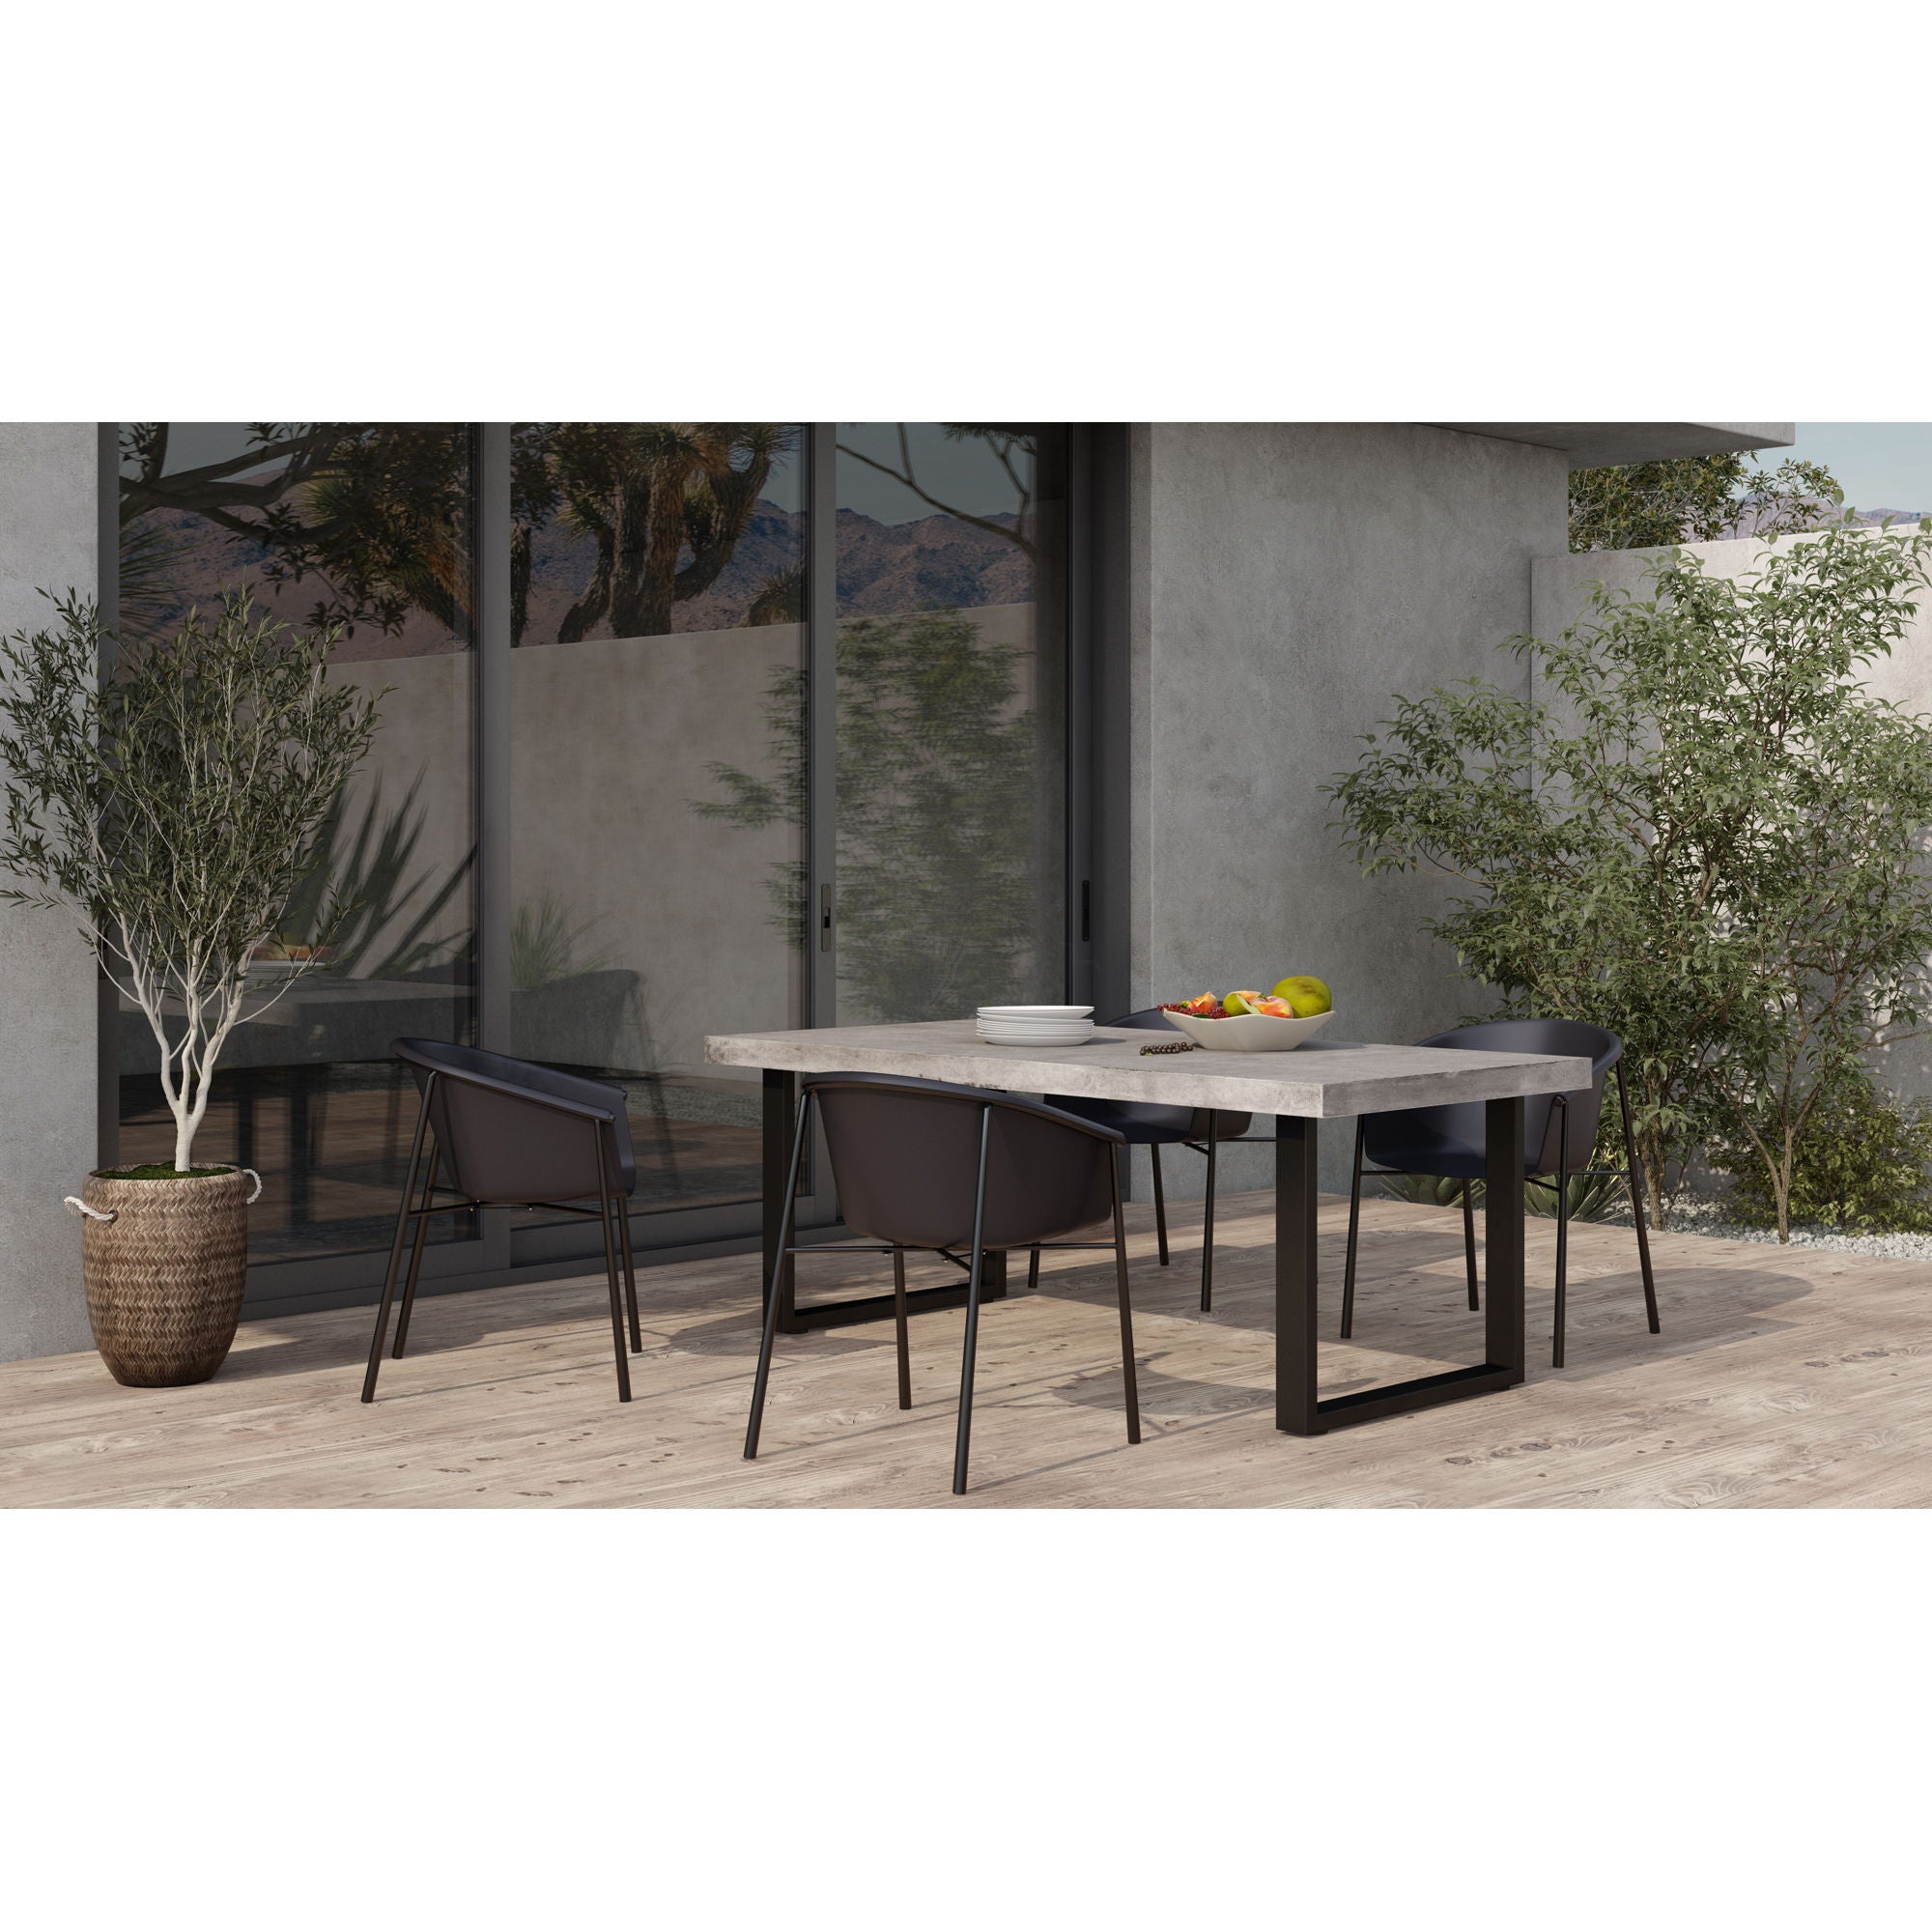 Jedrik - Outdoor Dining Table Large - Cement